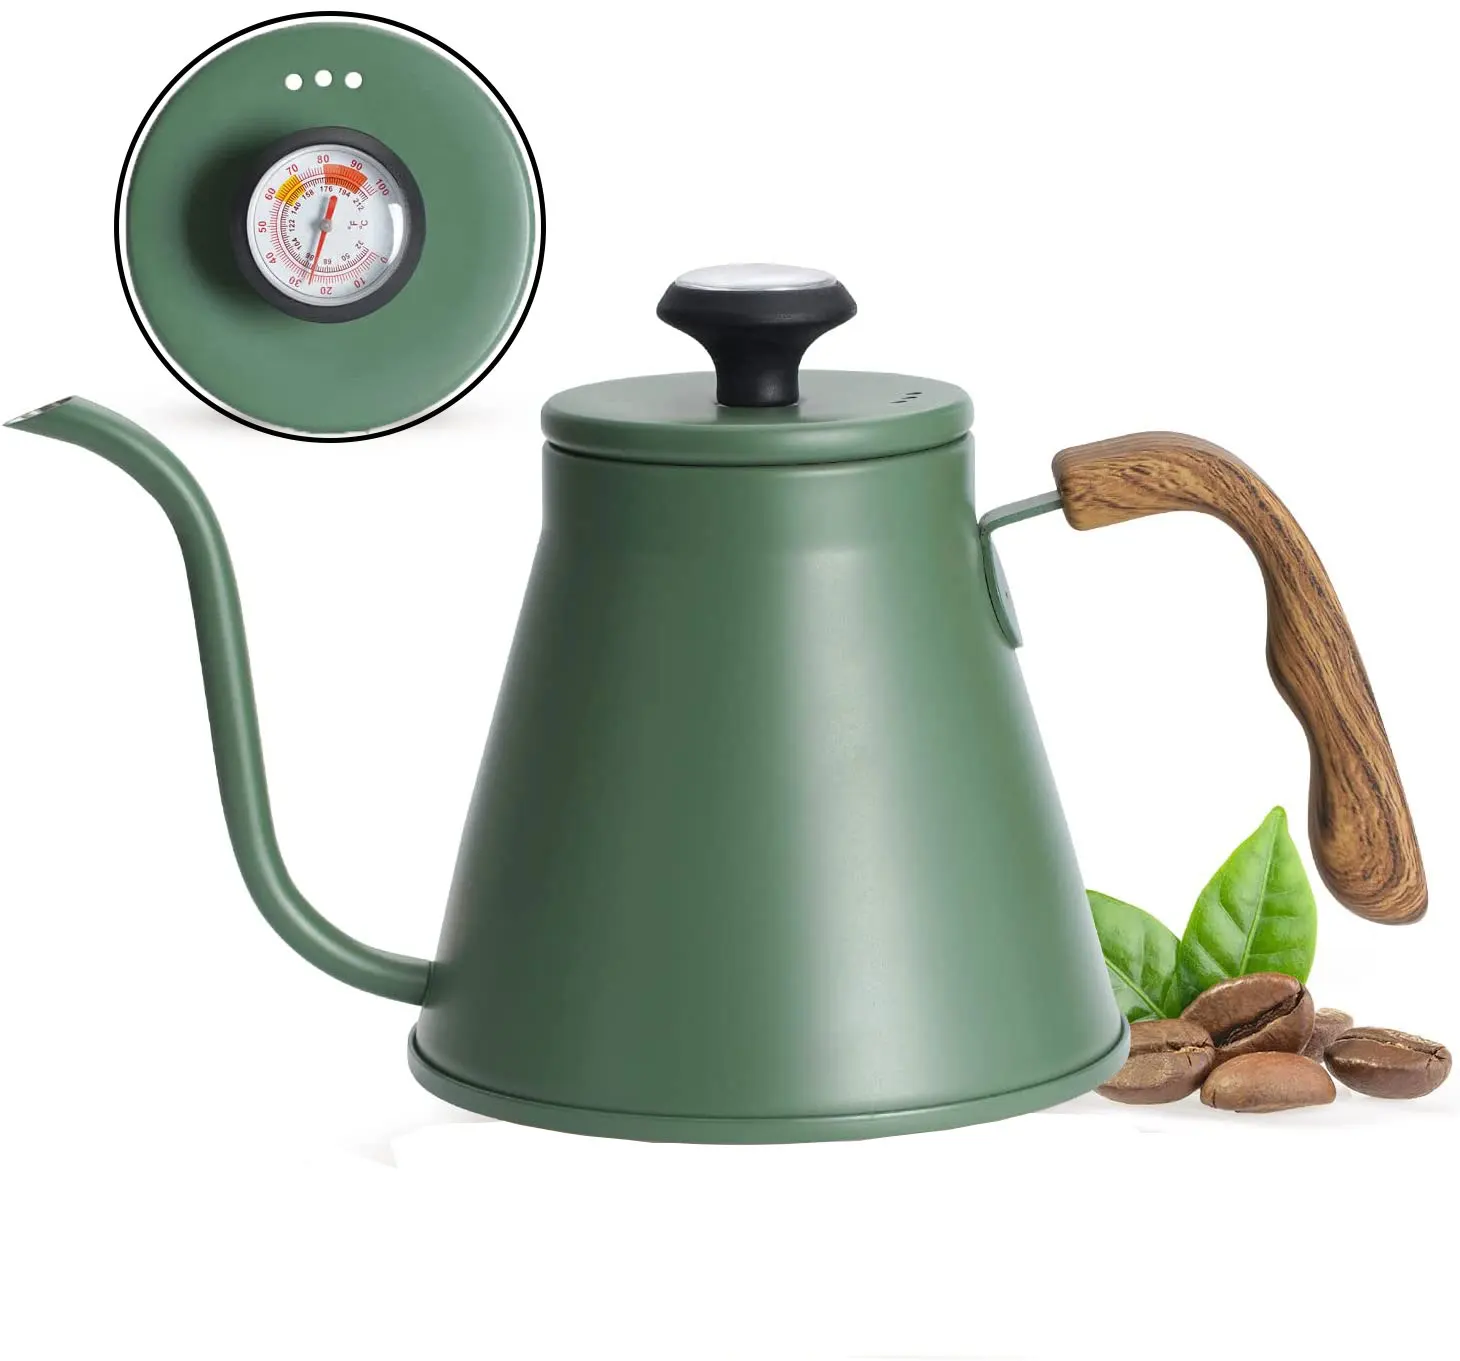 https://ae01.alicdn.com/kf/S2b57bd50e7f44b3db064464f41f6da5aU/42oz-Pour-Over-Kettle-Stove-Top-Gooseneck-Kettle-Coffee-kettle-with-Exact-Thermometer-Anti-Hot-Handle.jpg